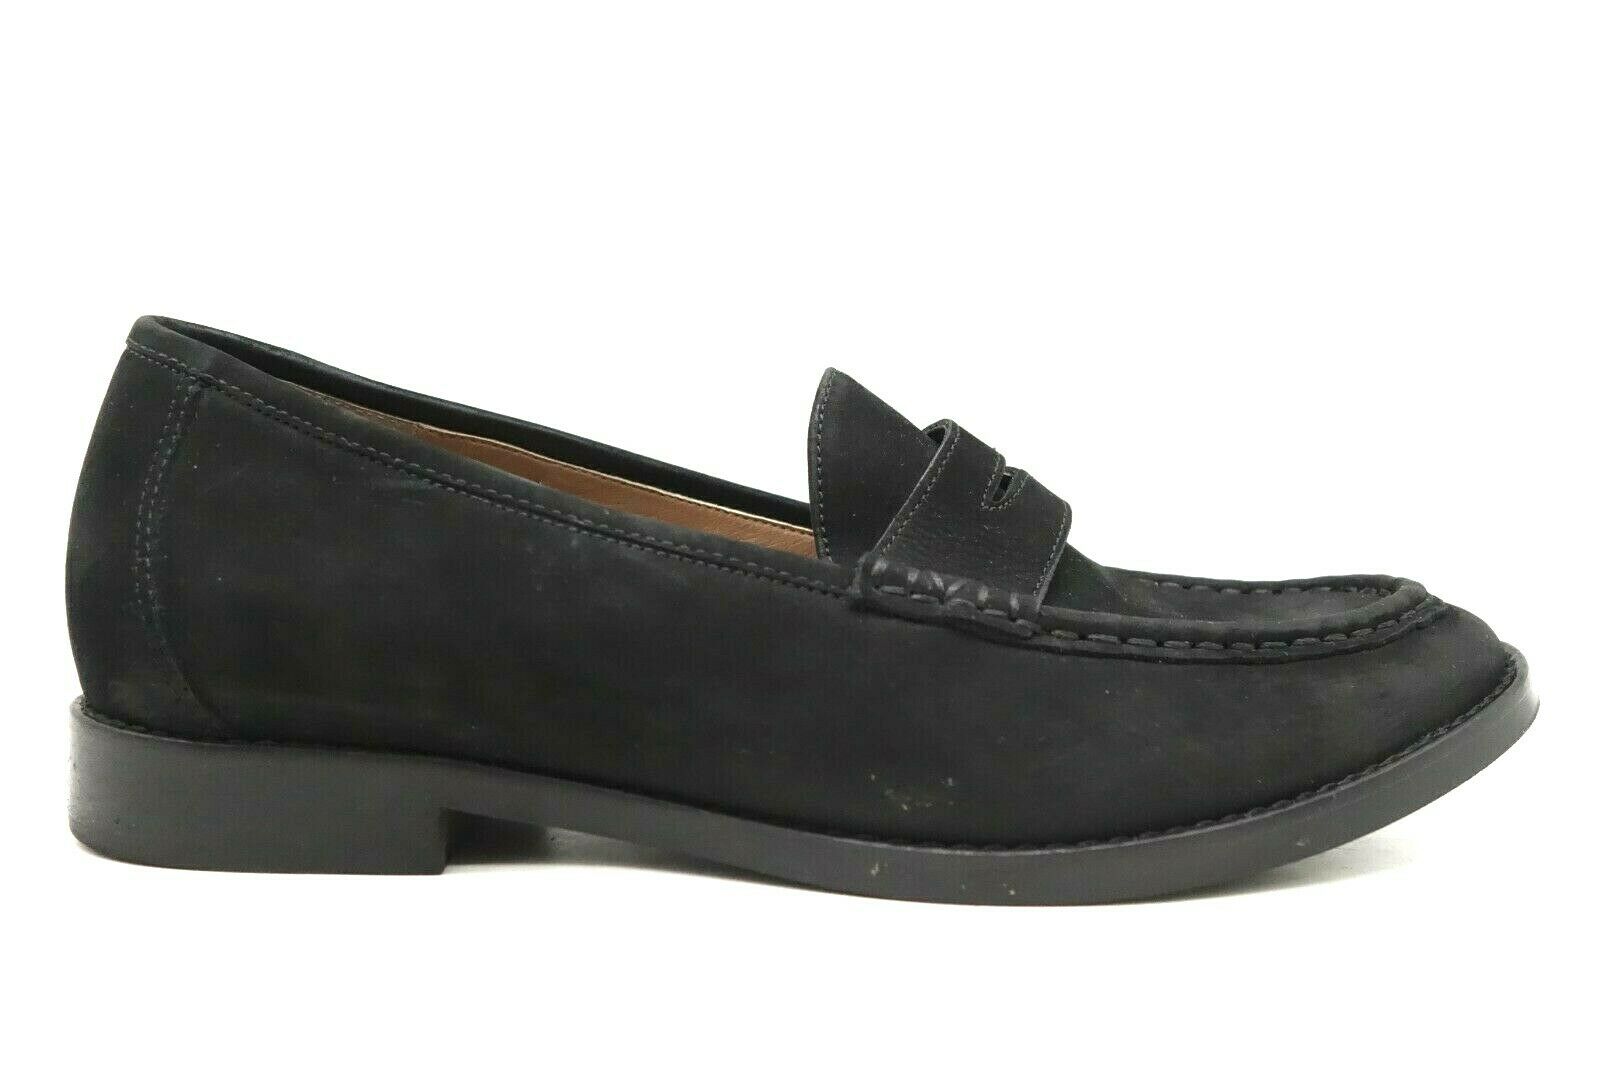 Vionic Waverly Black Leather Dress Casual Comfort Penny Loafers Shoes Women's 8